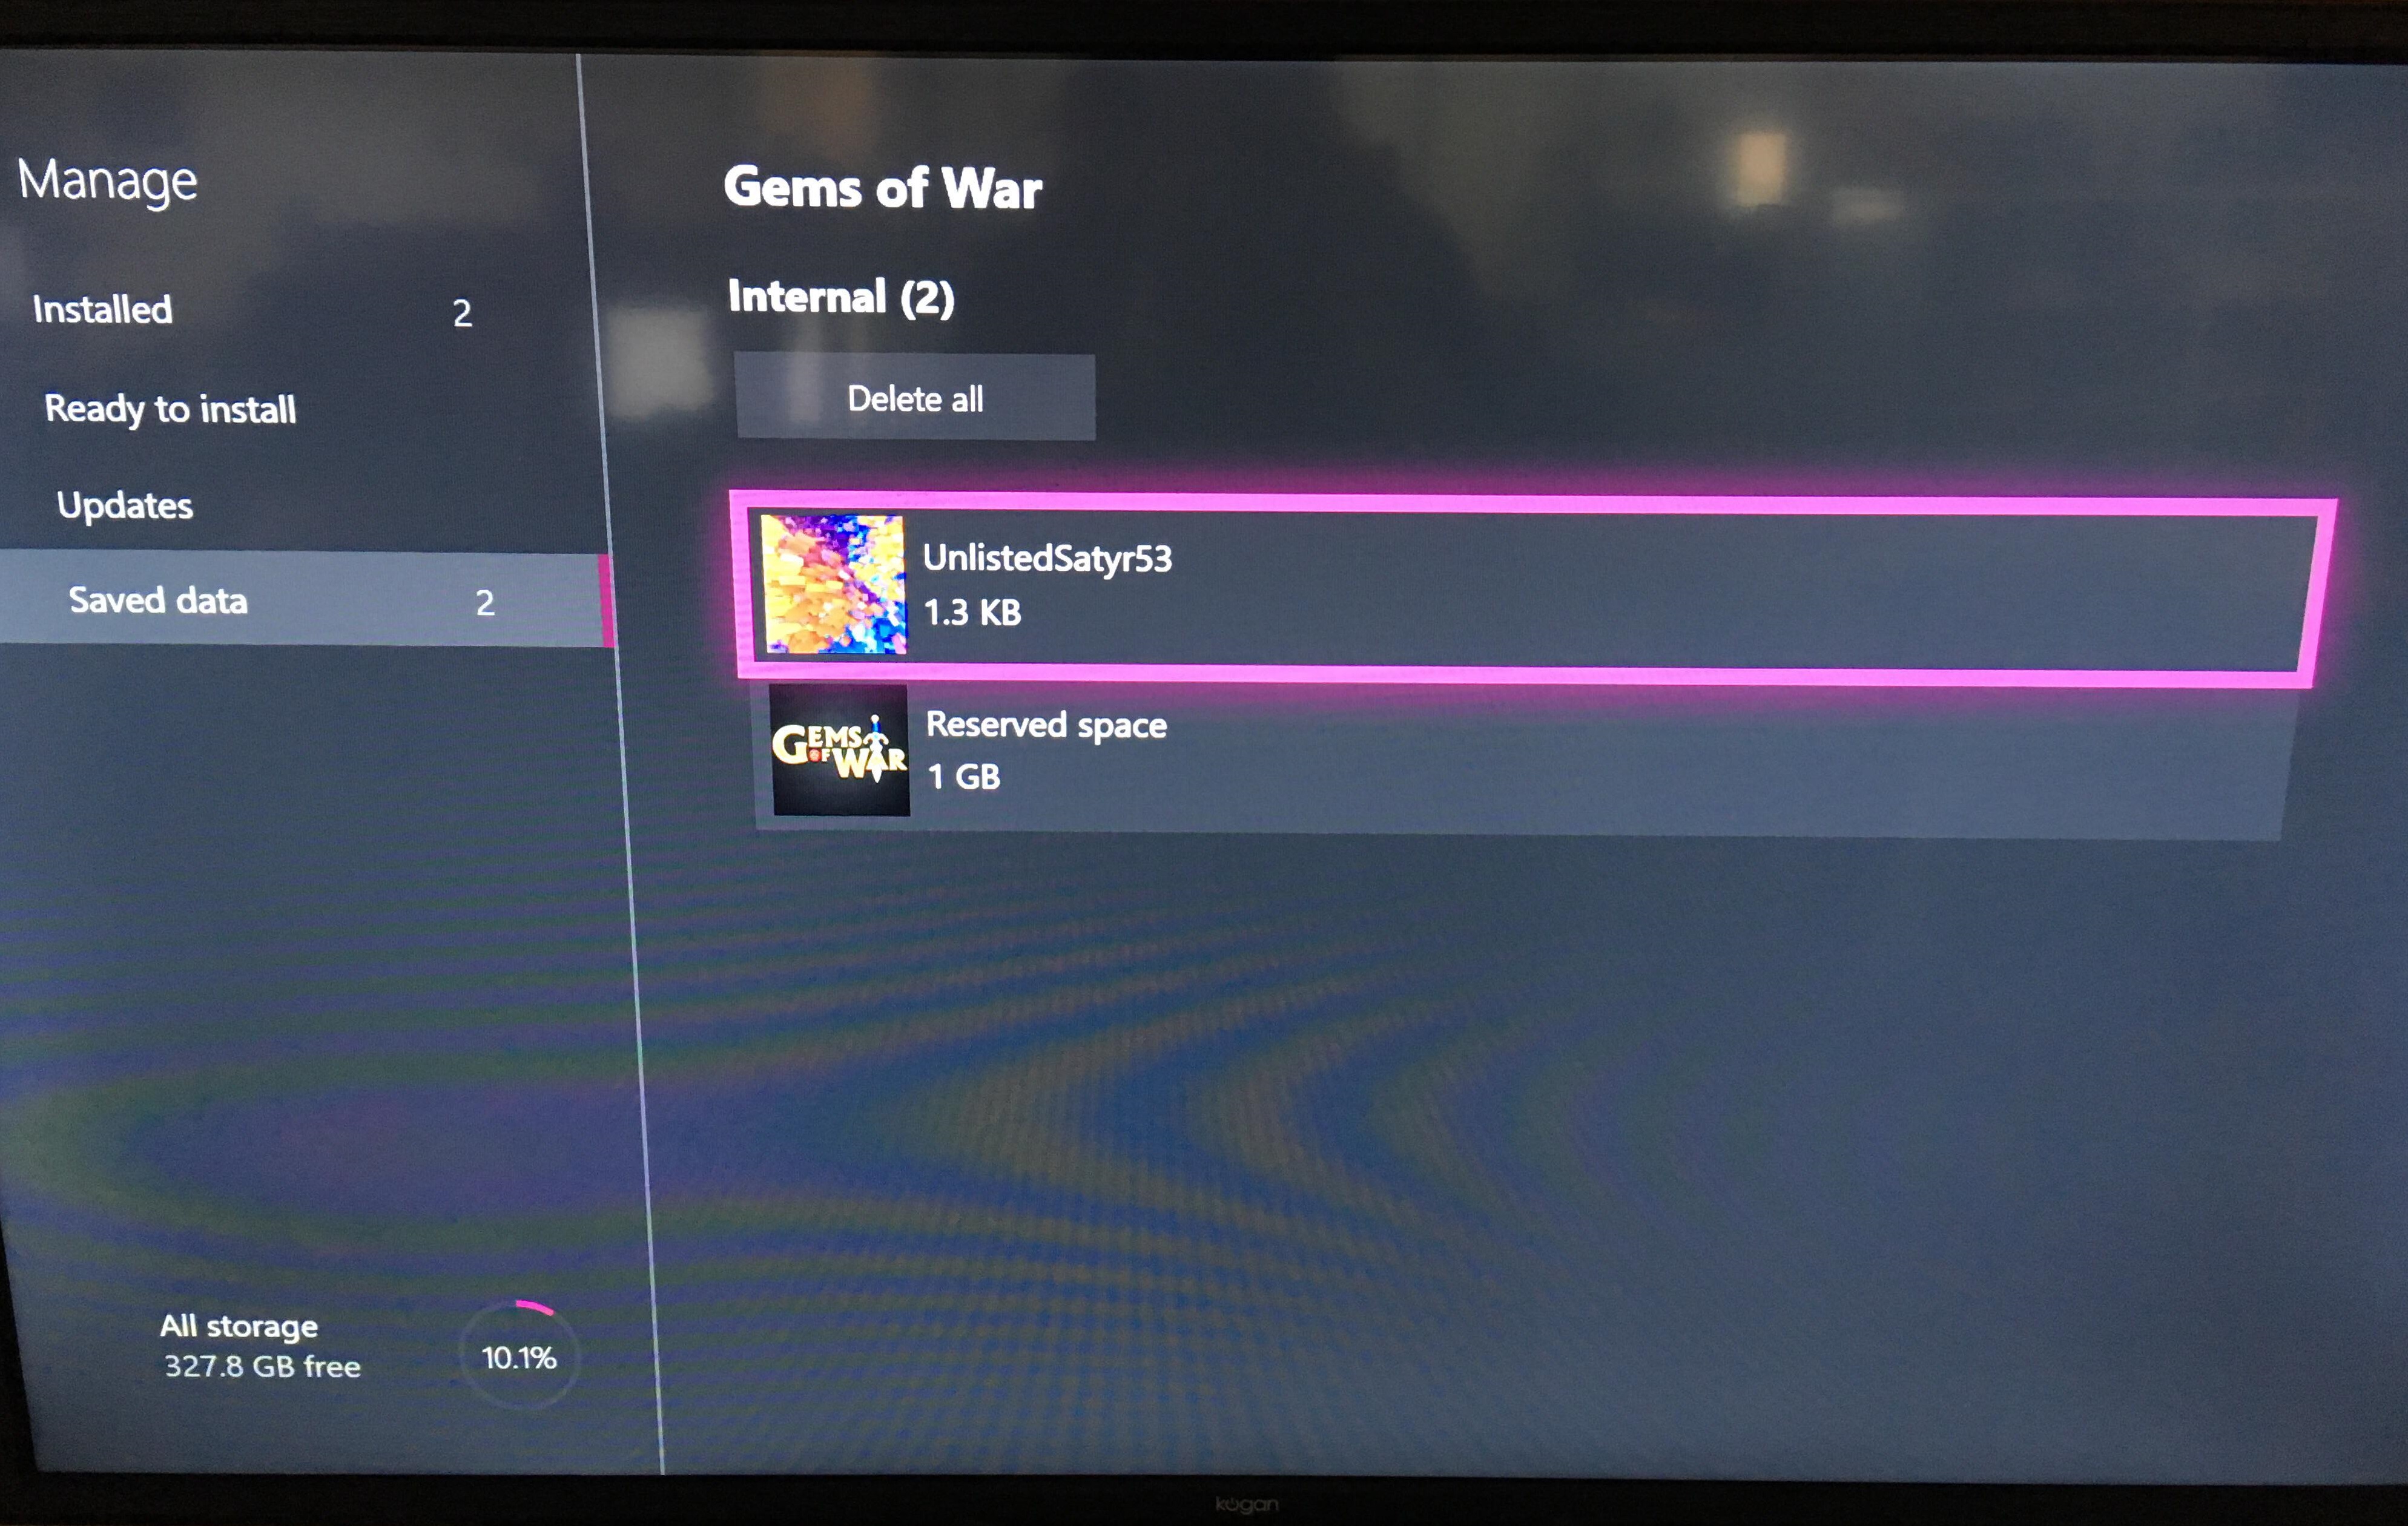 How-to Delete Save Data on Xbox – Gems of War Support